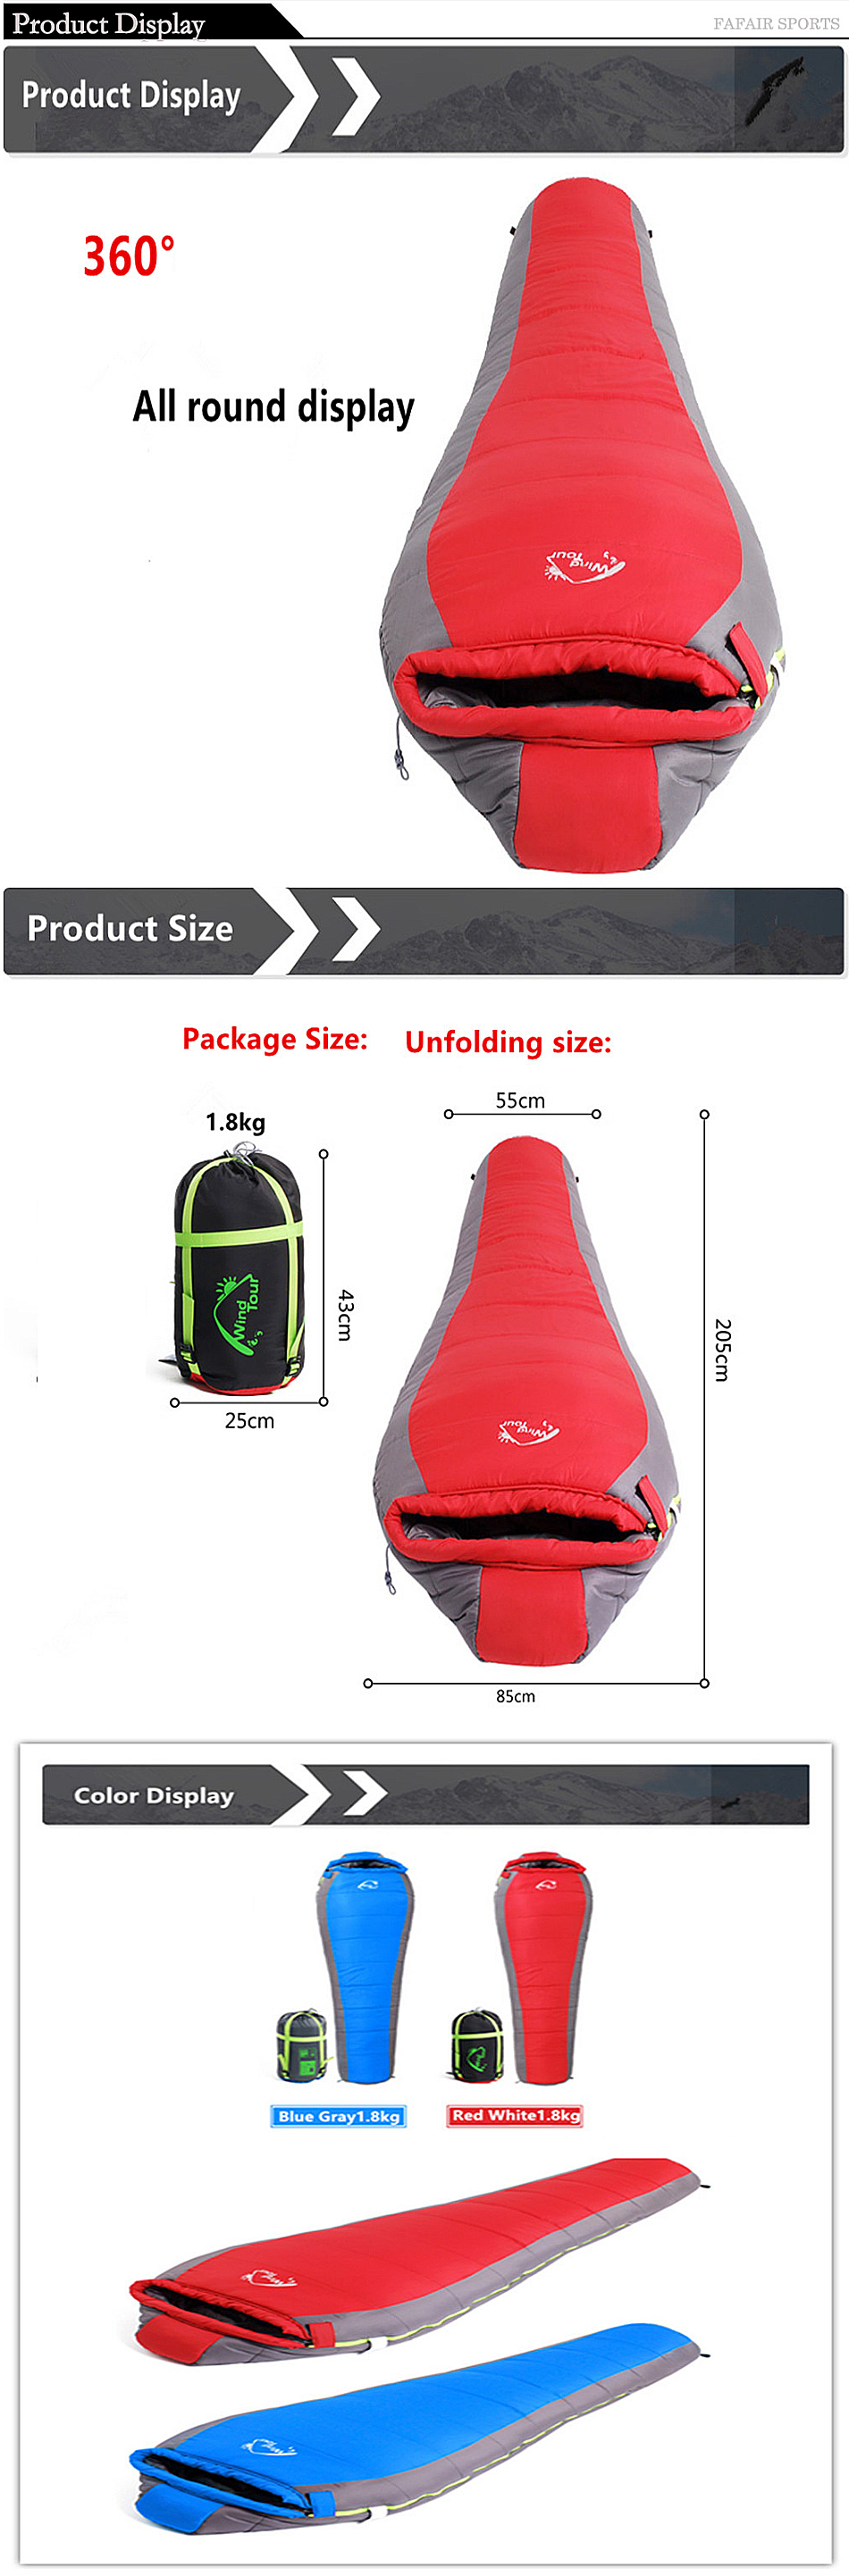 WIND-TOUR-Ultralight-Outdoor-Sleeping-Bag-18KG-Cotton-Hiking-Camping-Sleeping-Bag-Splicing-Thickened-1756712-2